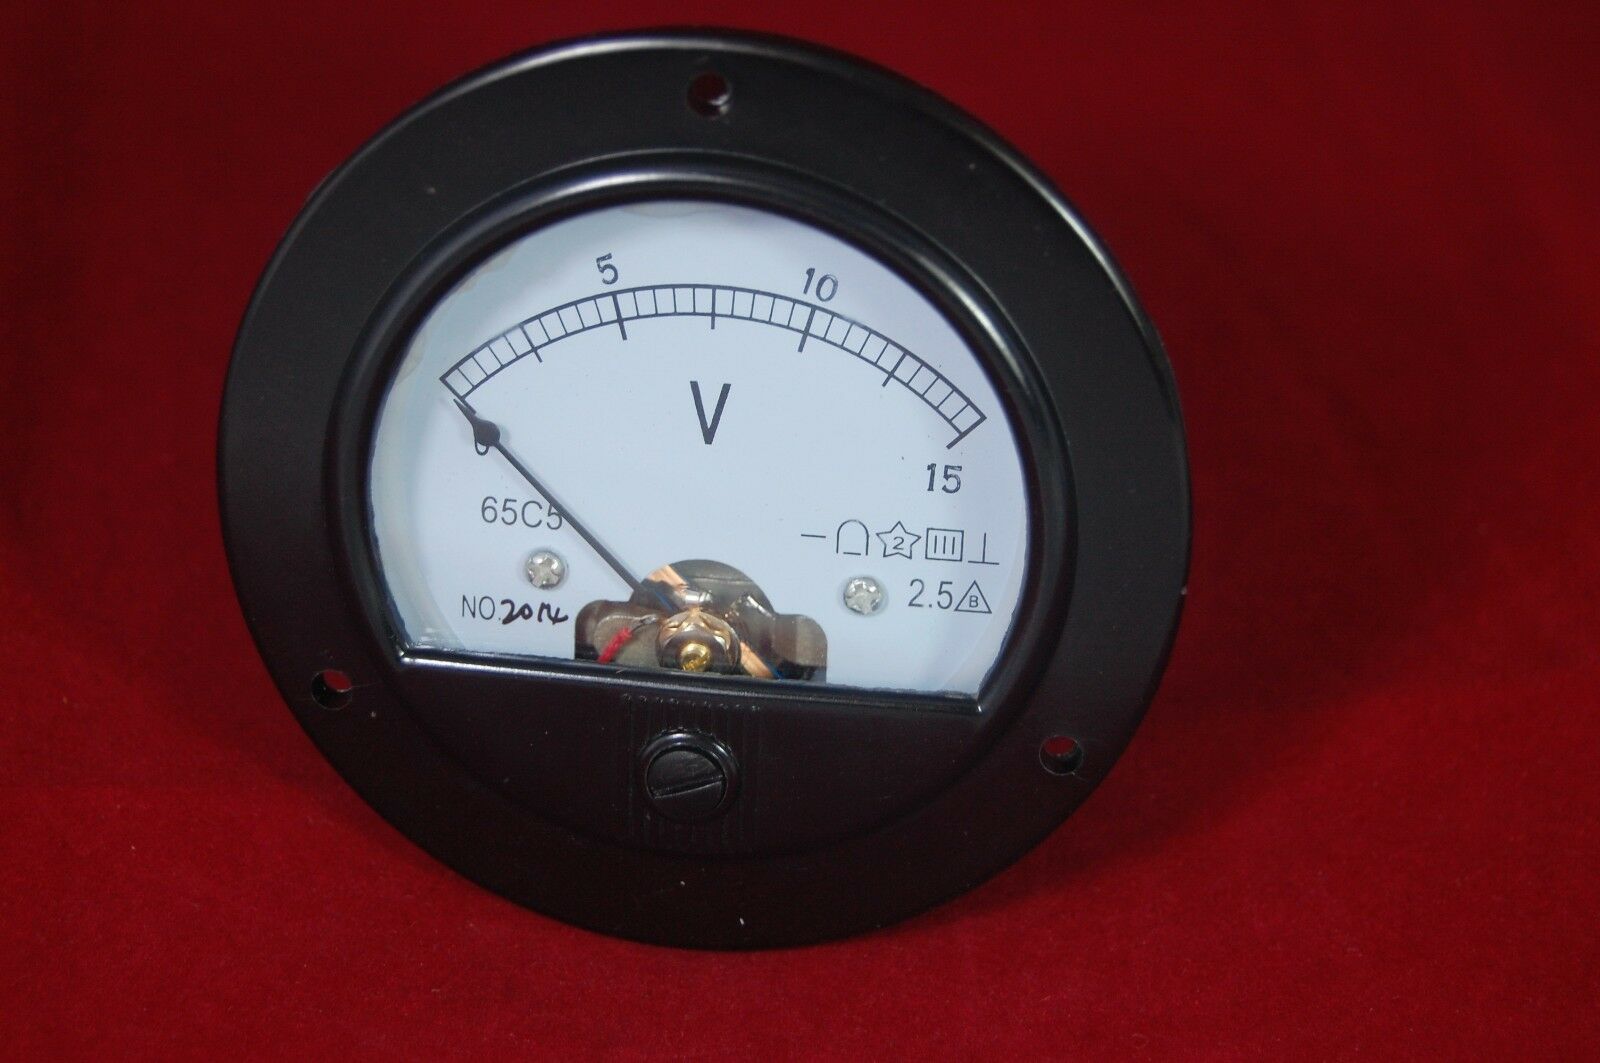 DC 0-15V Round Analog Voltmeter Voltage Panel meter Dia. 90mm directly Connect